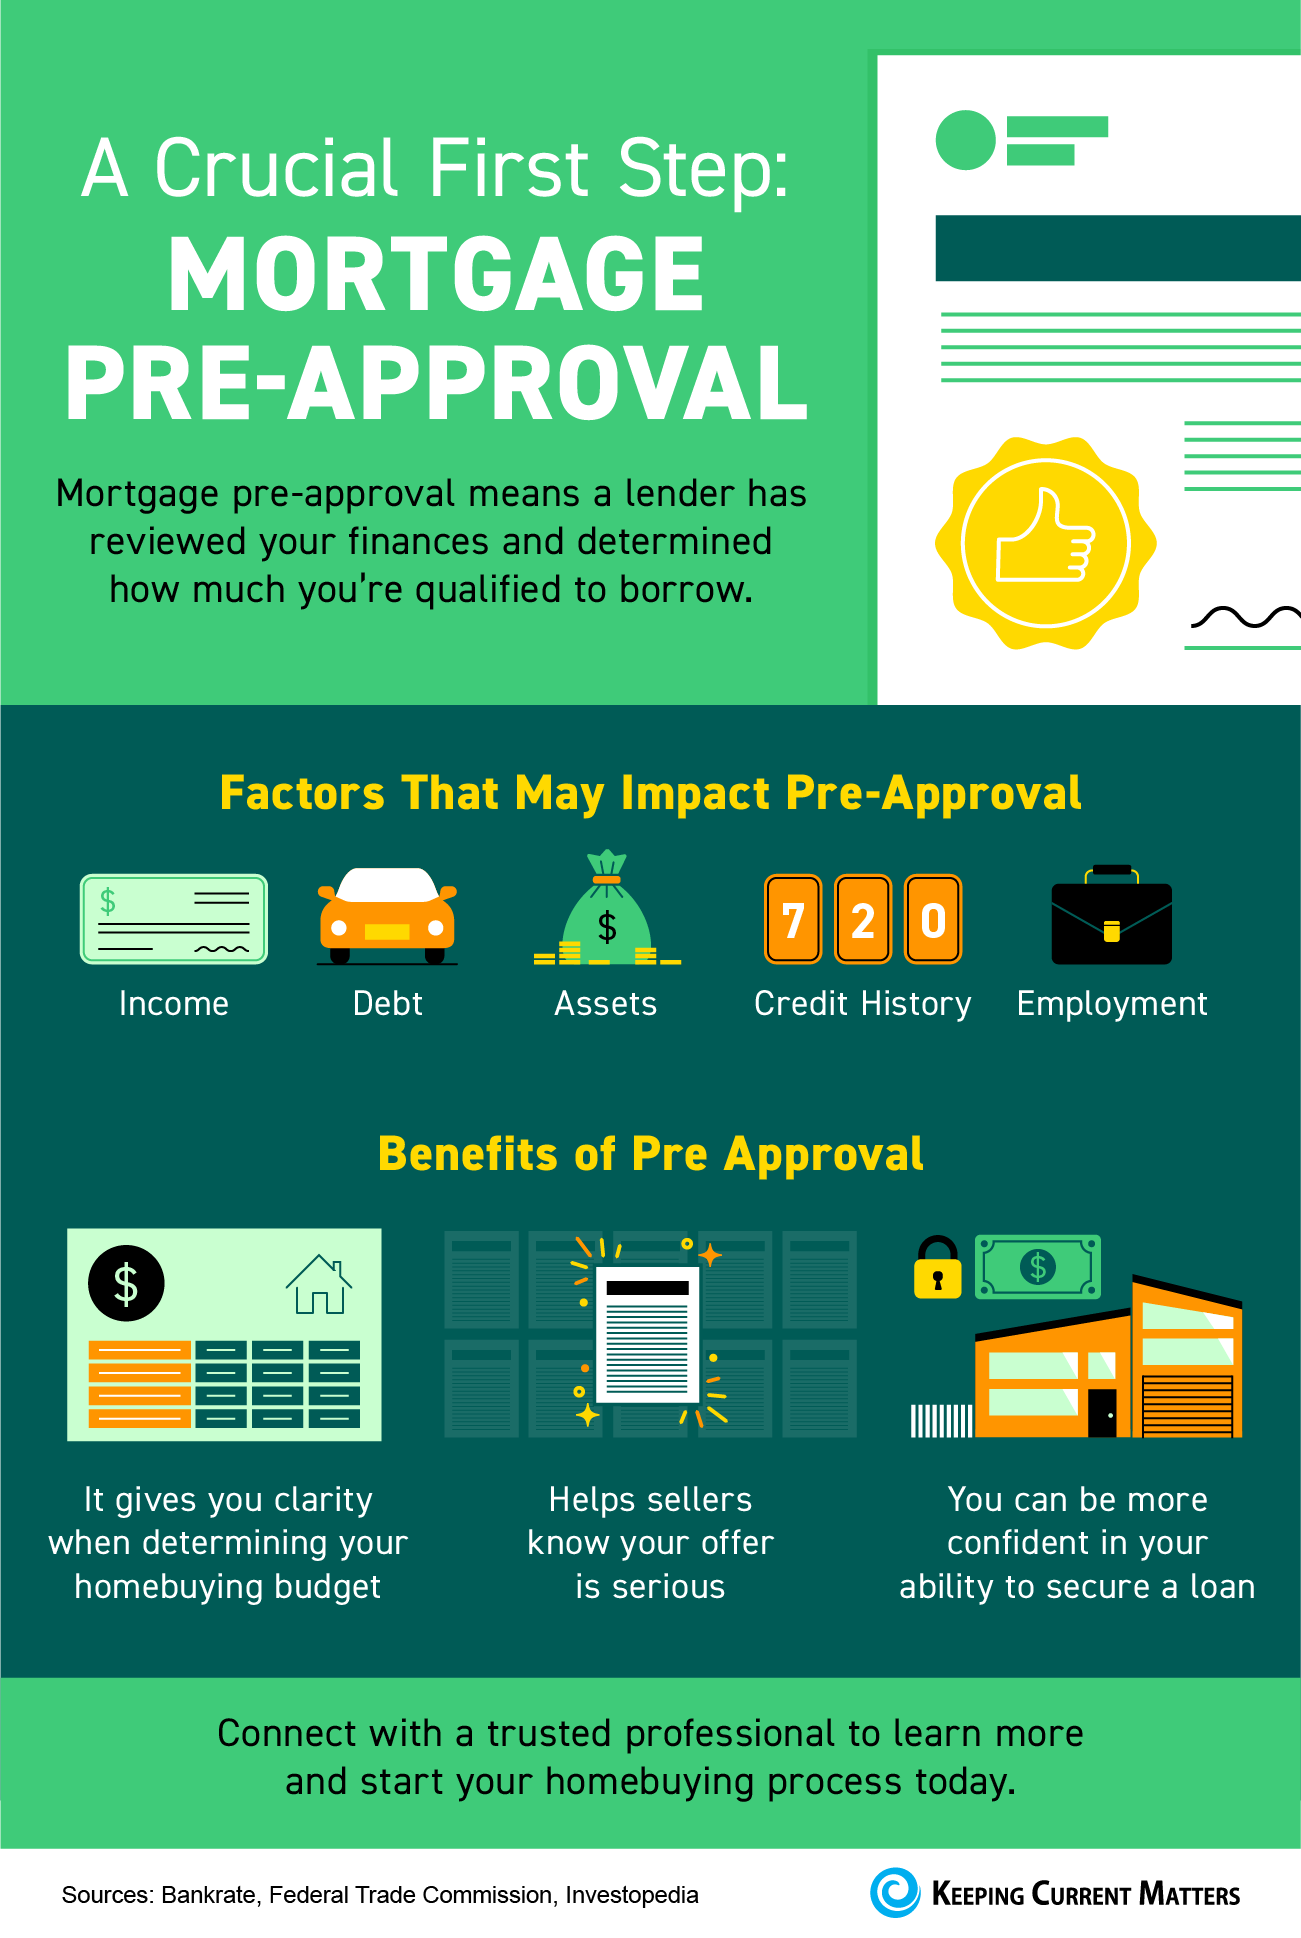 A Crucial First Step: Mortgage Pre-Approval [INFOGRAPHIC] | Keeping Current Matters